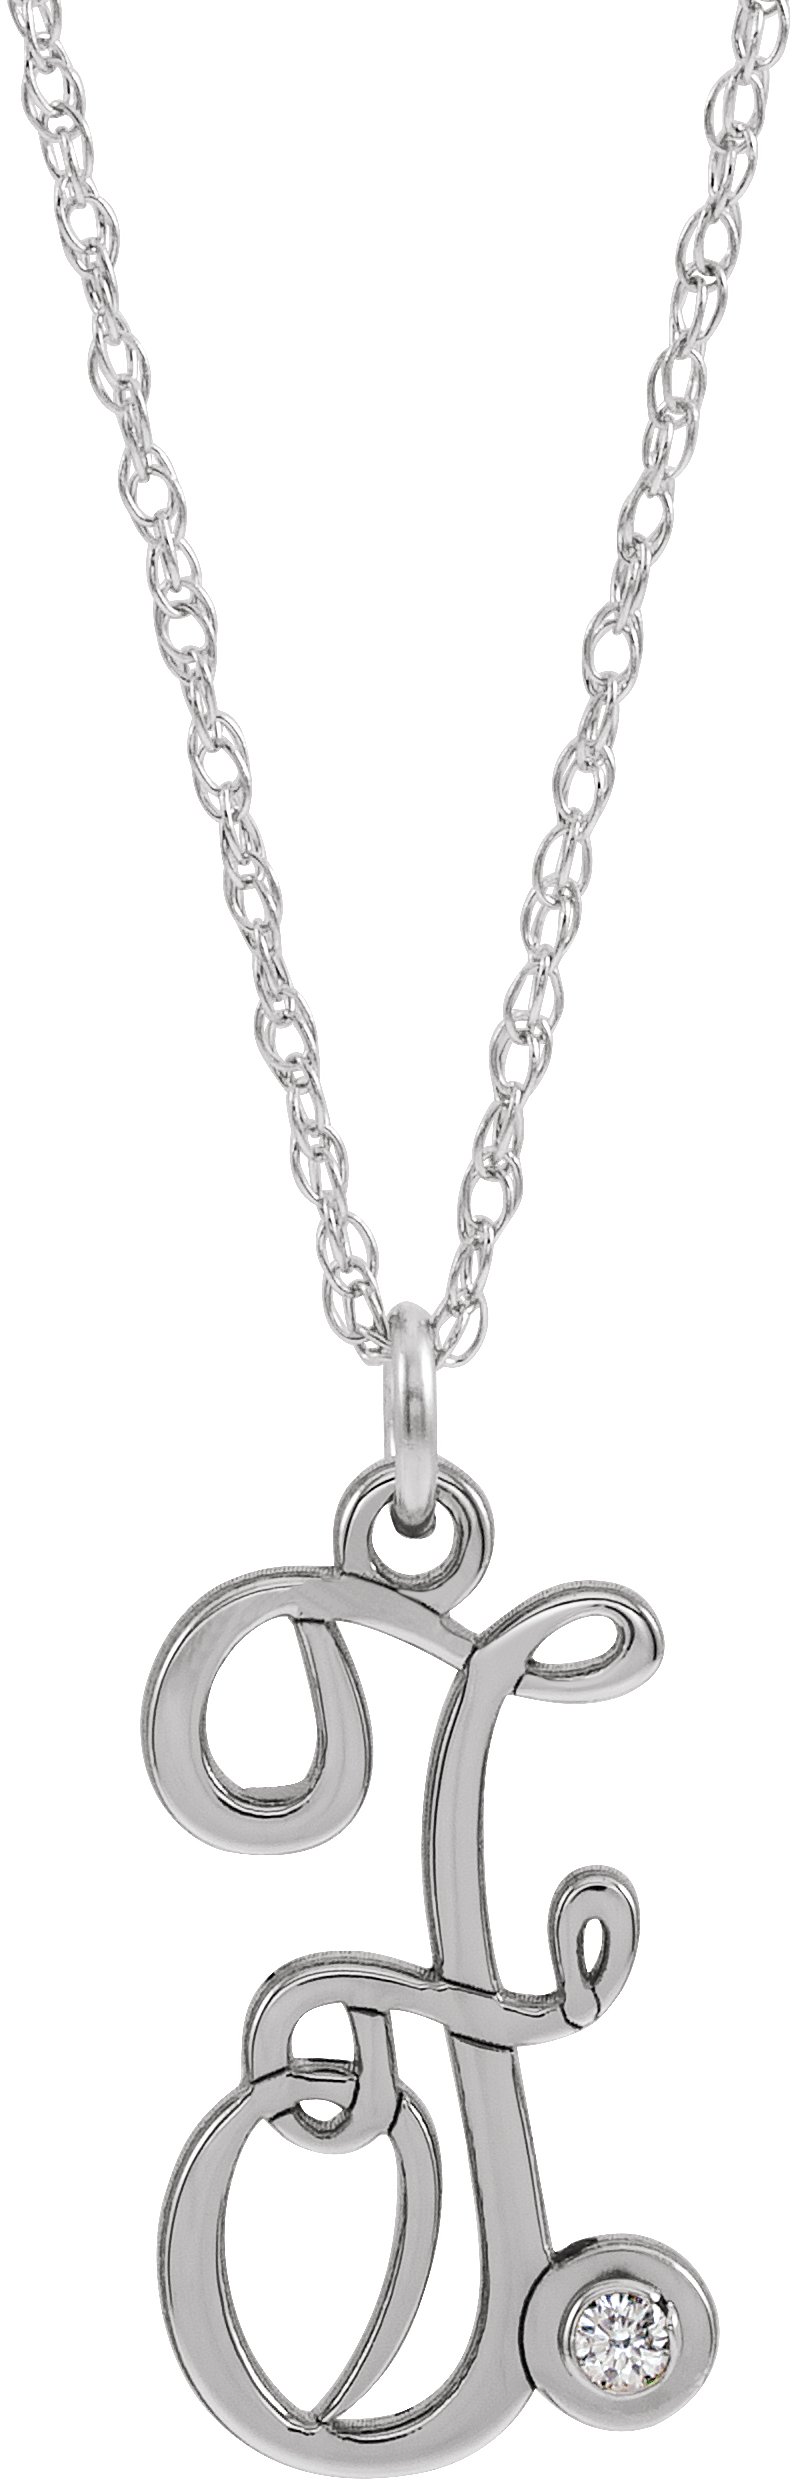 Sterling Silver .02 CT Diamond Script Initial F 16 18 inch Necklace Ref. 16047597